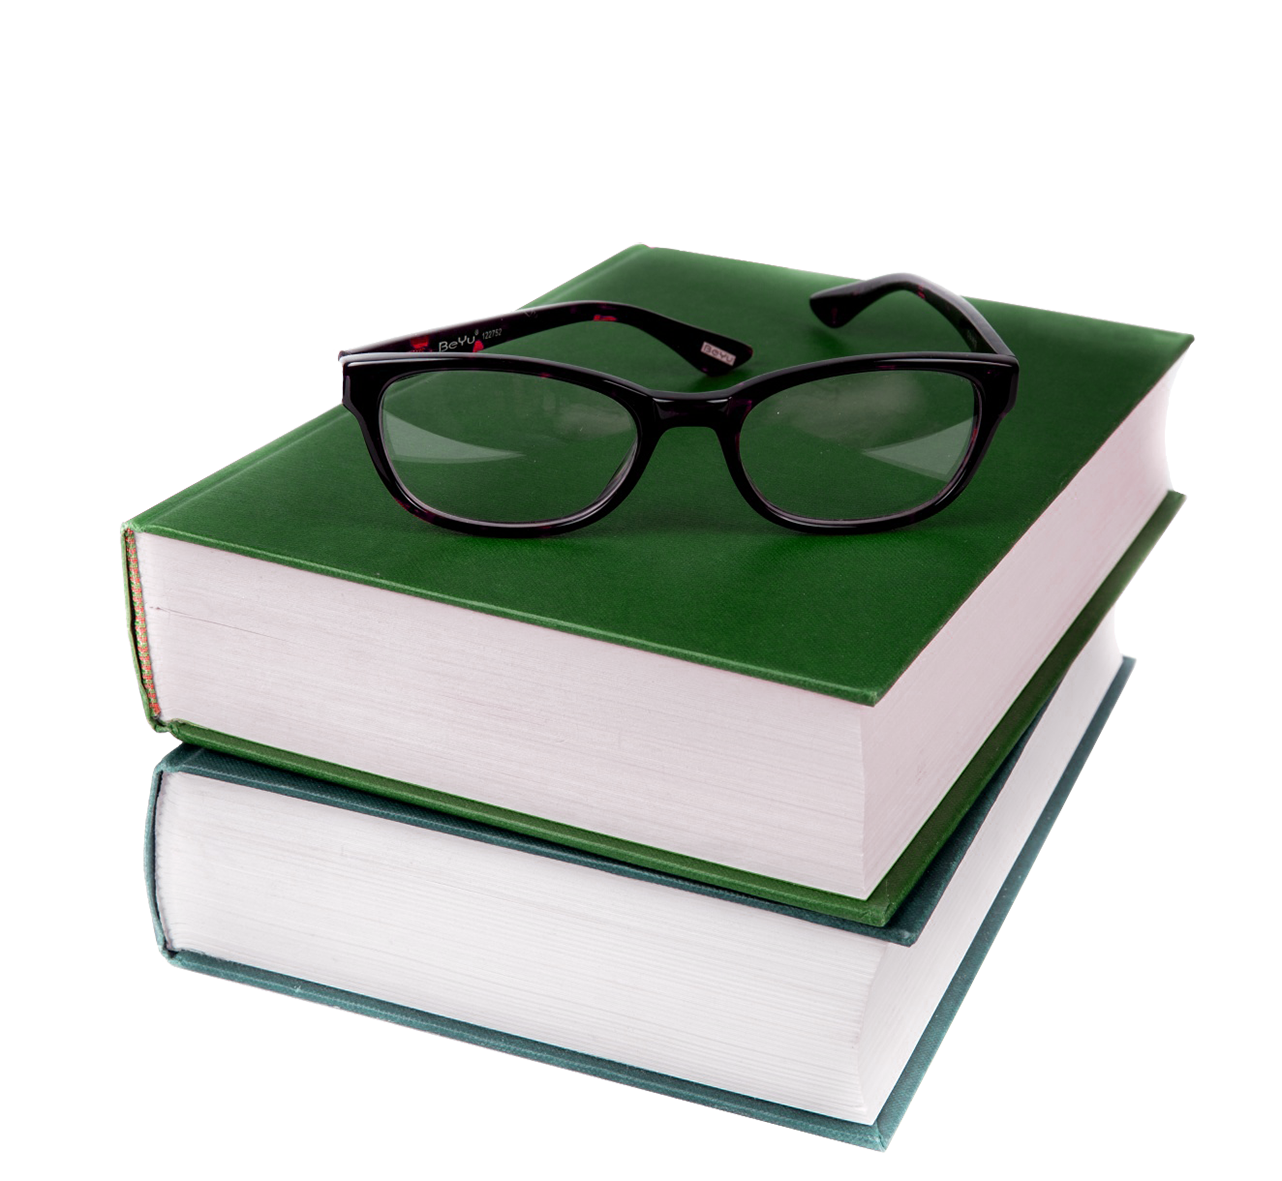 green books and glasses